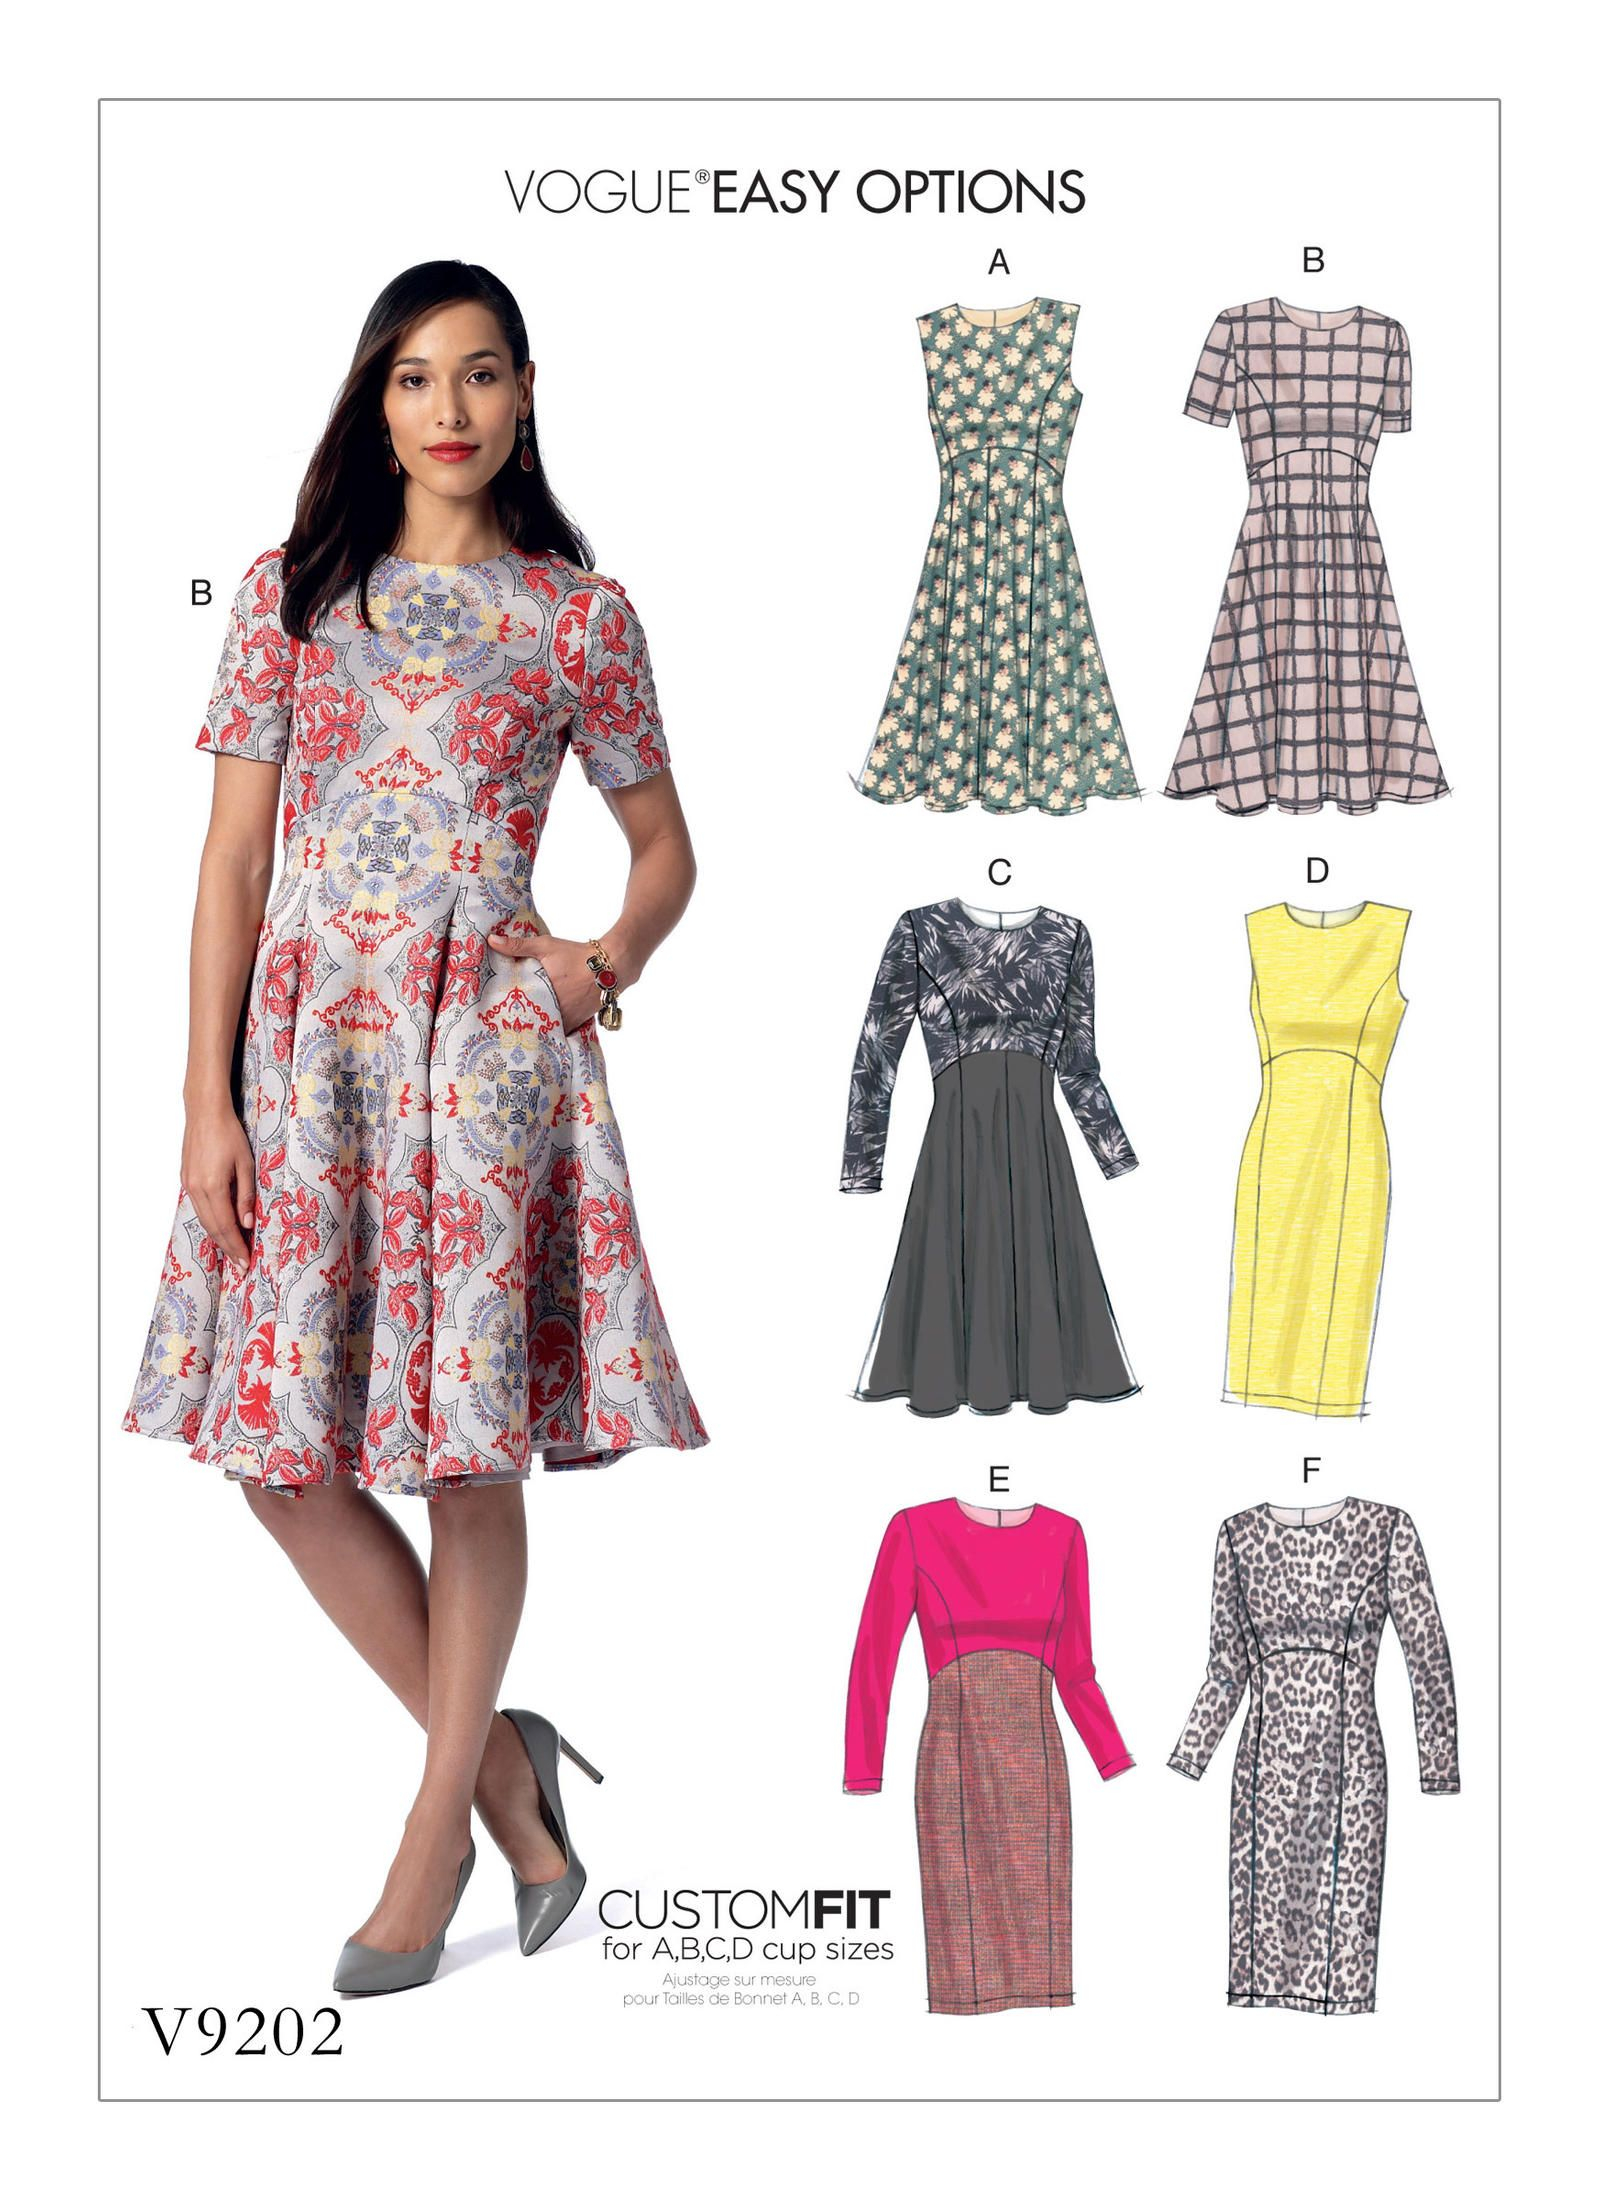 Vogue Sewing Patterns V9202 Misses Dresses With Flared Or Straight Skirt Options Sewing